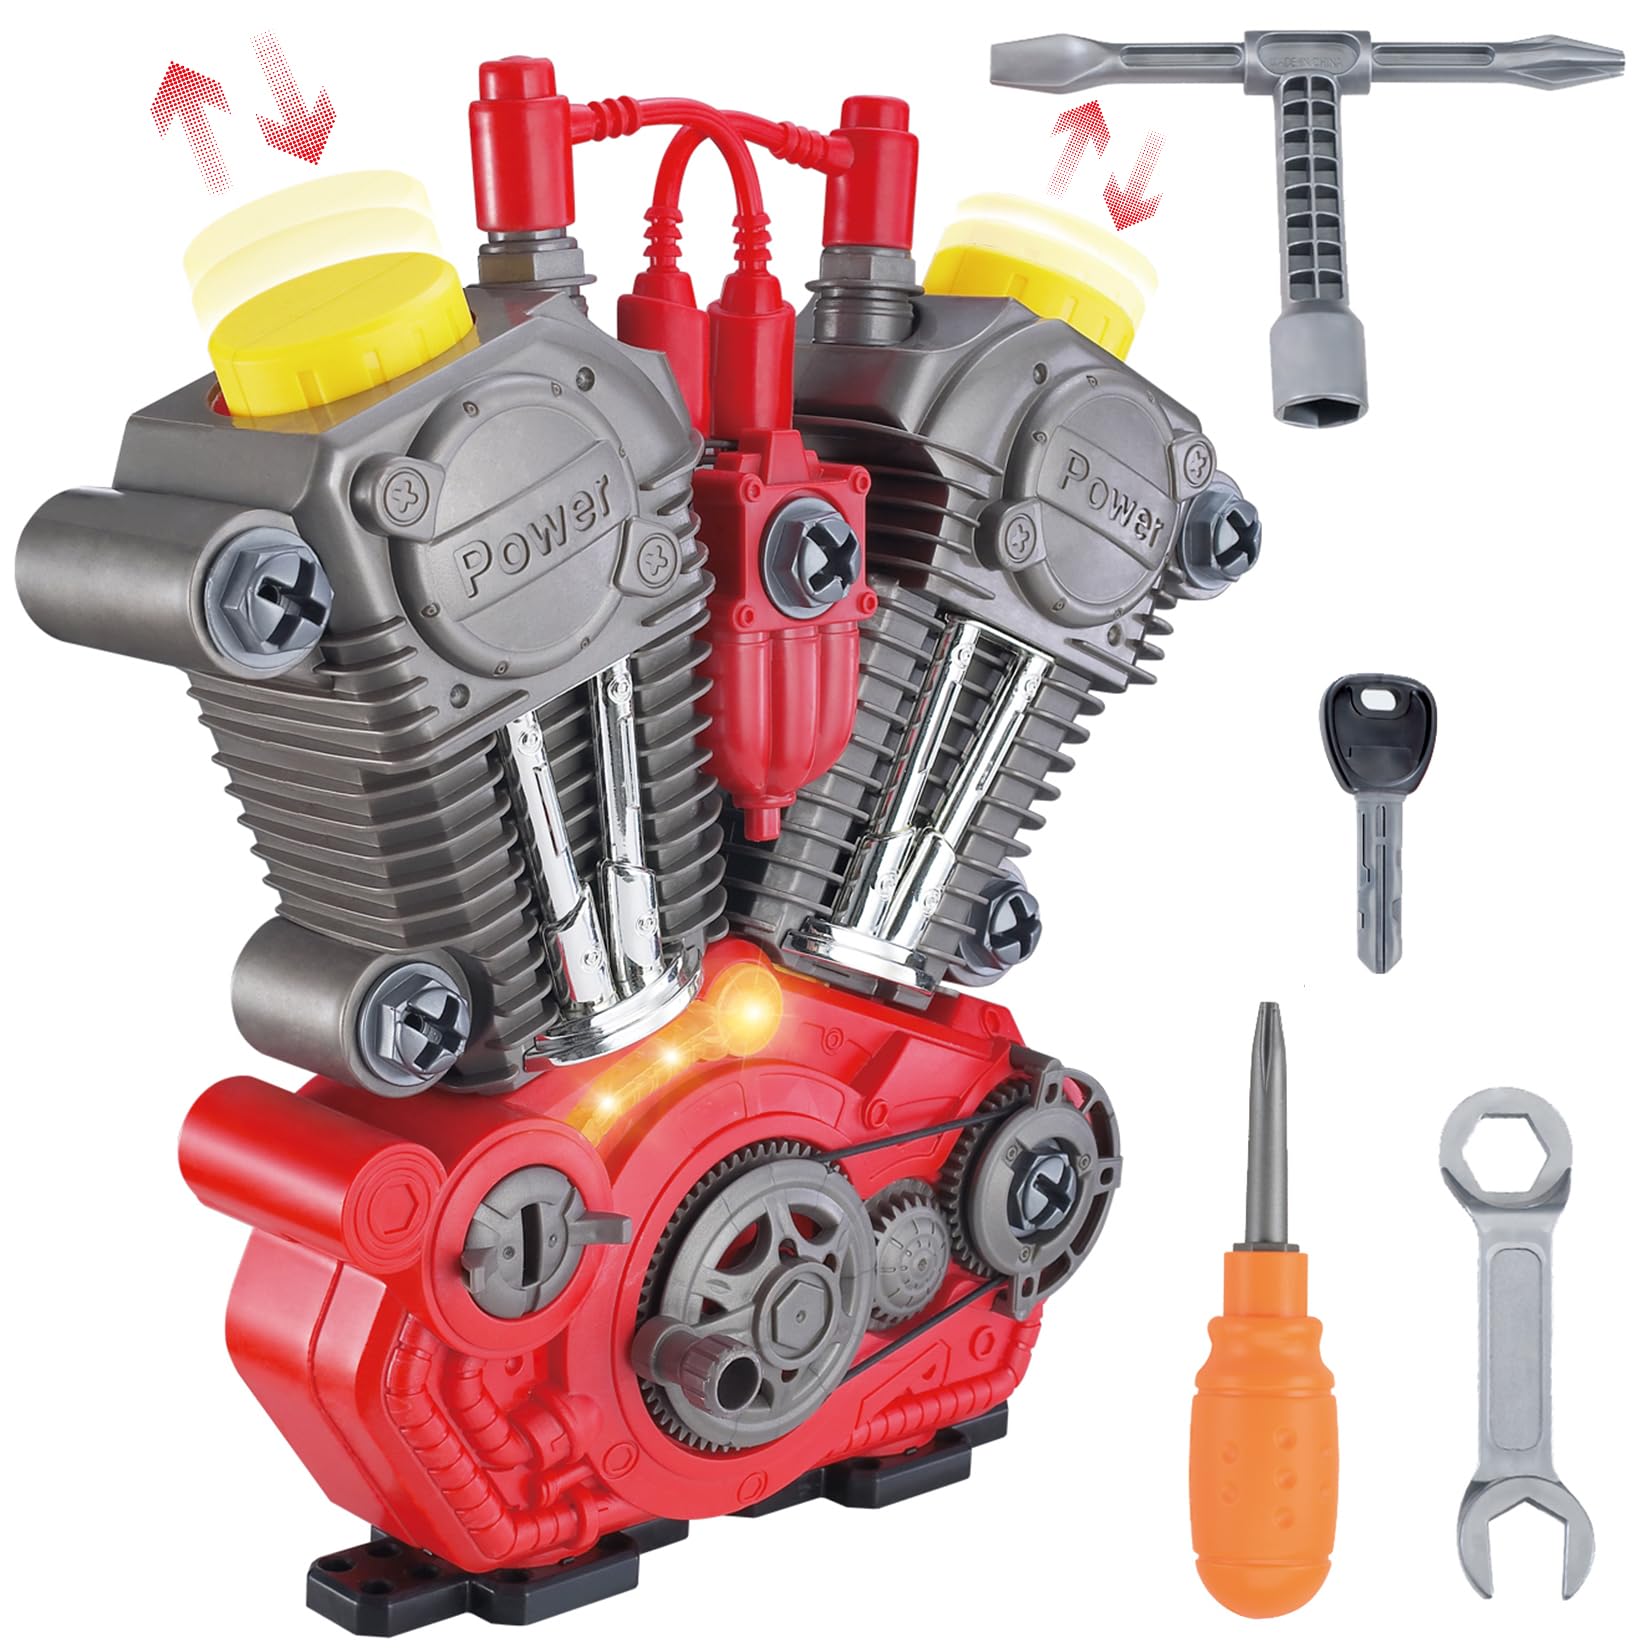 Engine Building Toy Kit with Lights, Sounds & 20+ Mechanic Tools - Educational Boys Gift